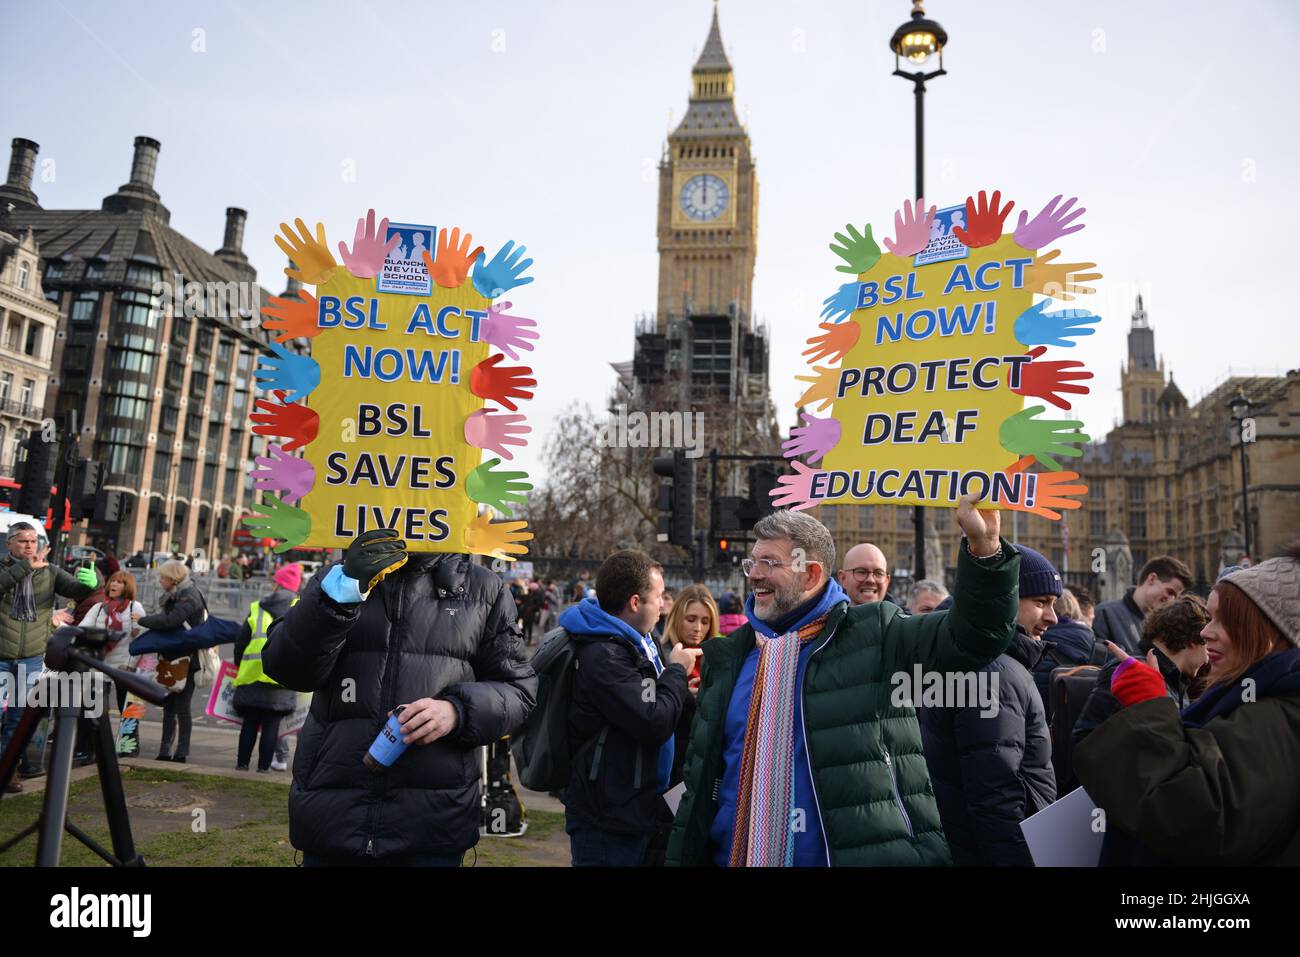 Protesters seen holding placards expressing their opinion during the demonstration. British sign language and deaf community rallied opposite the U.K. Parliament in support of BSL (British Sign Language) bill which recognises sign language as an official language of the United Kingdom. Stock Photo